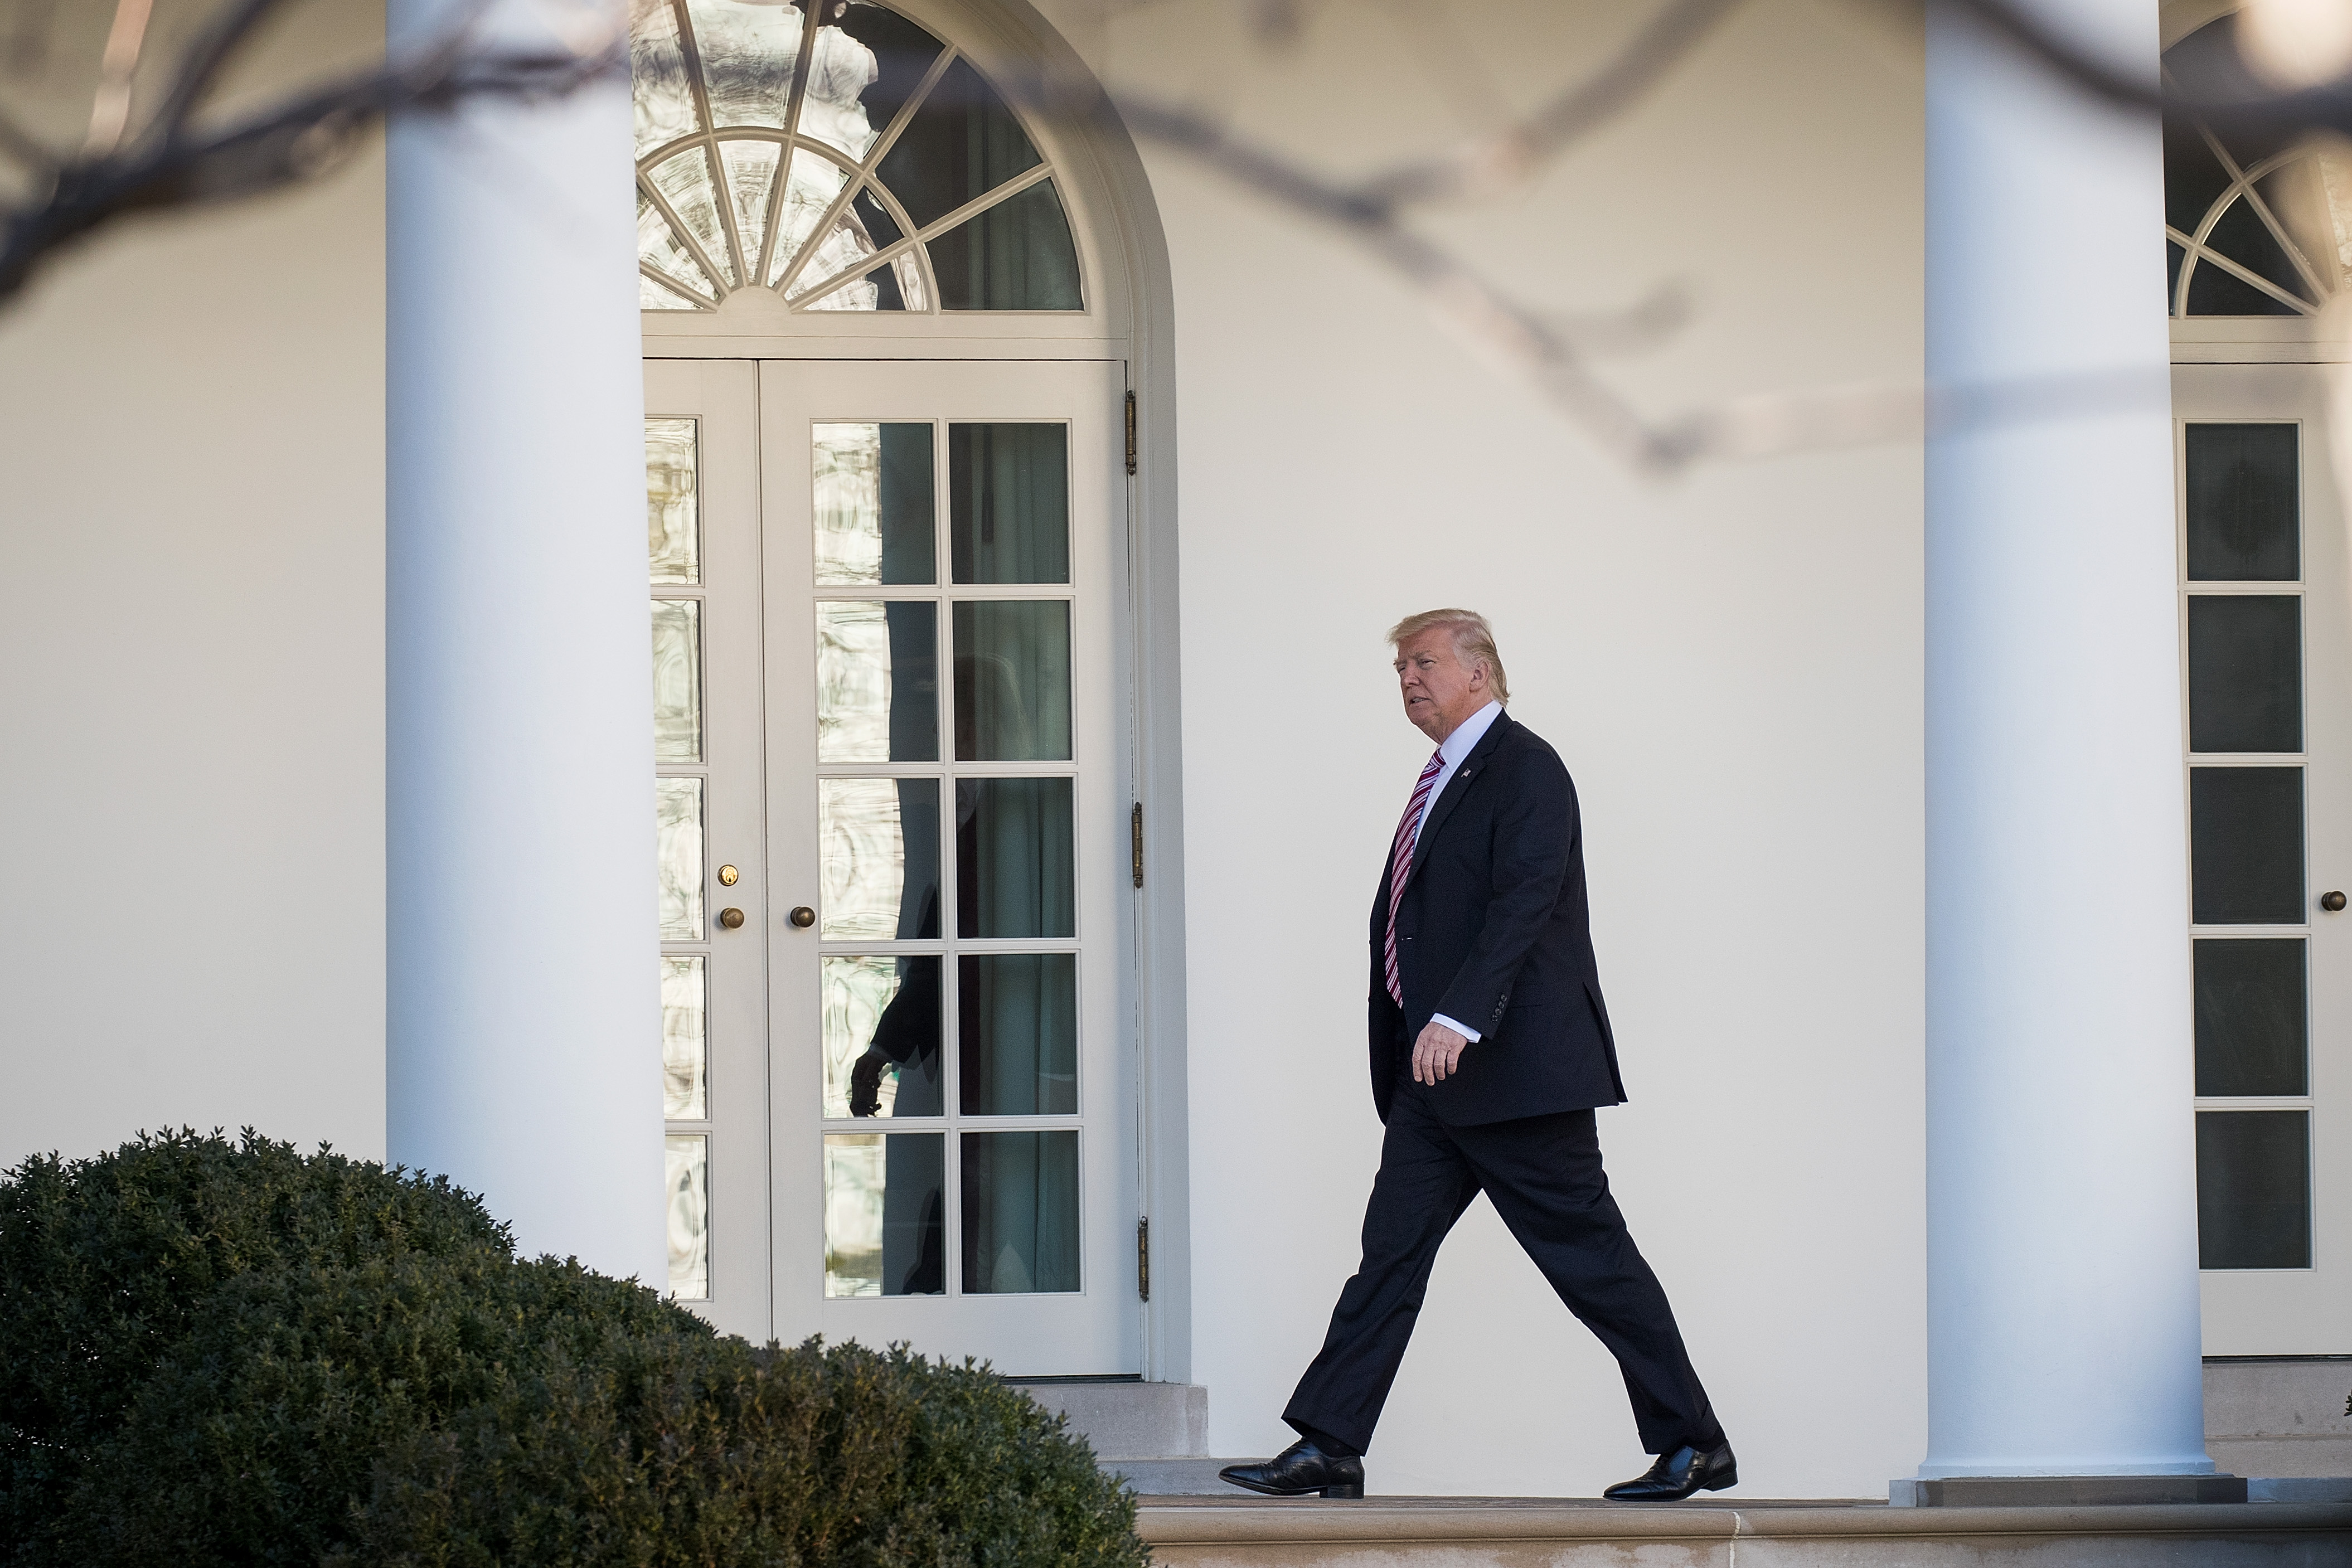 President Trump walks along the West Wing Colonnade on his way to the Oval Office at the White House, on Jan. 26, 2017. (Drew Angerer—Getty Images)